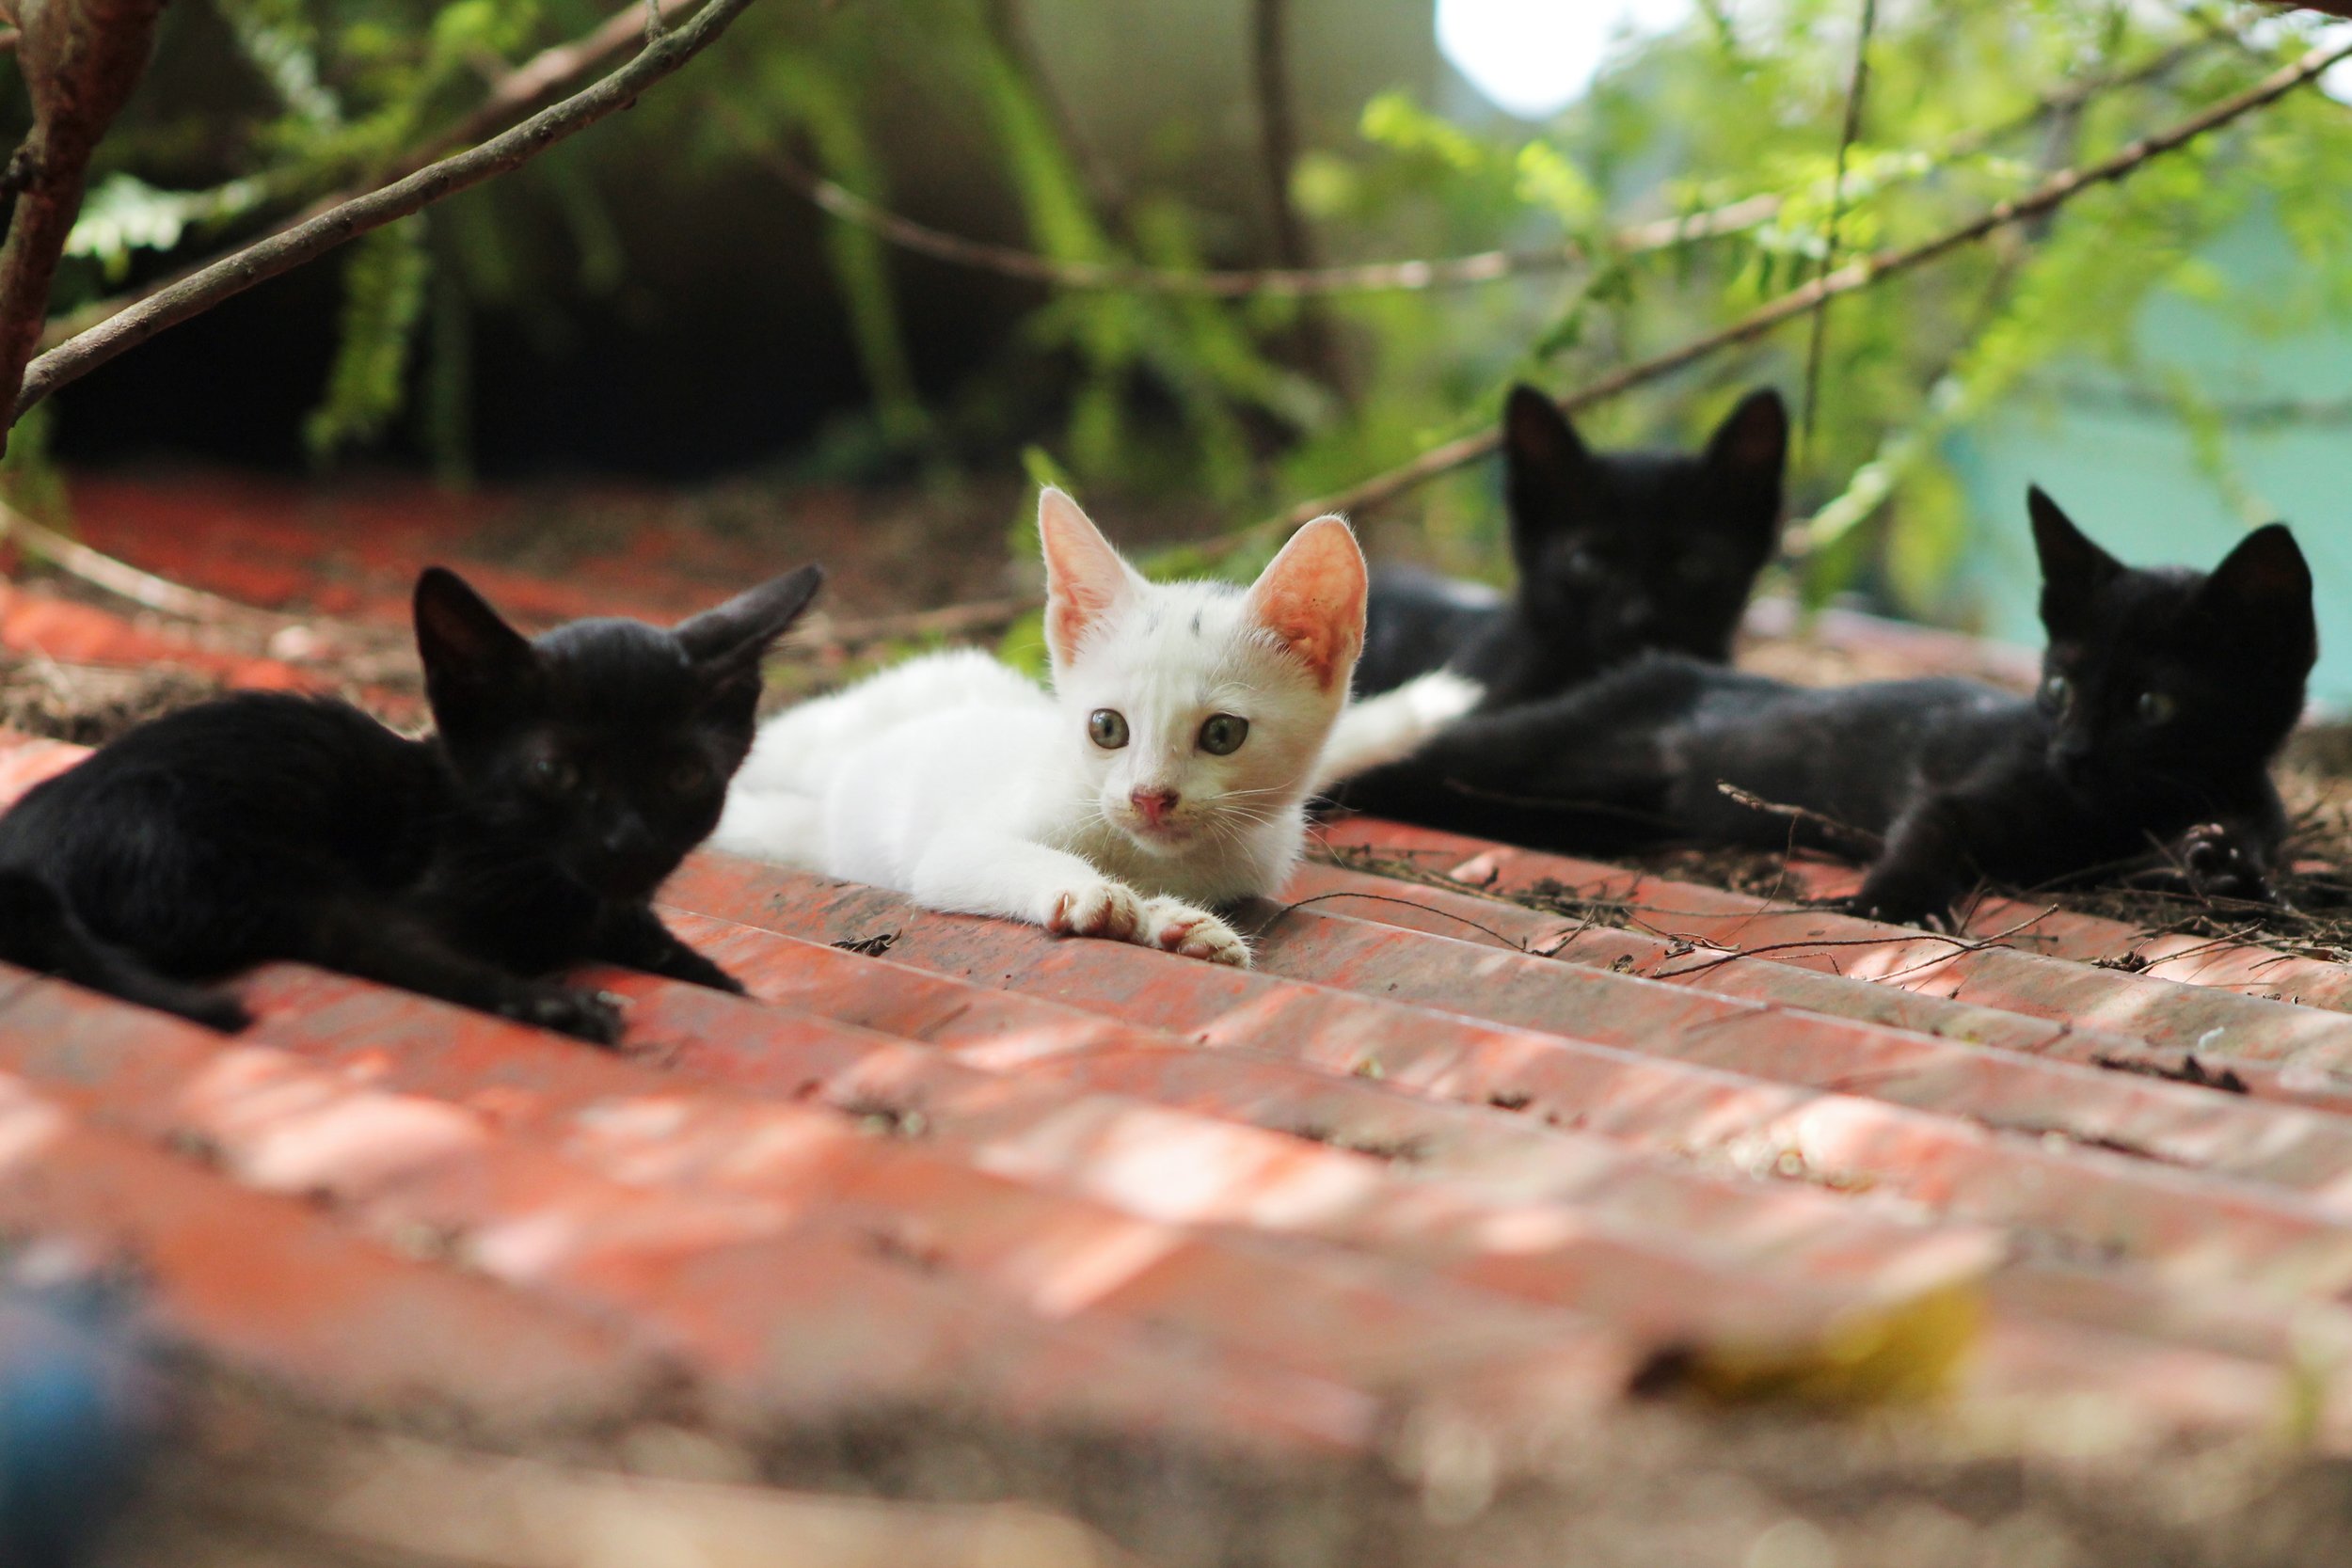  We offer donation-based services for feral, stray + barn cats.  